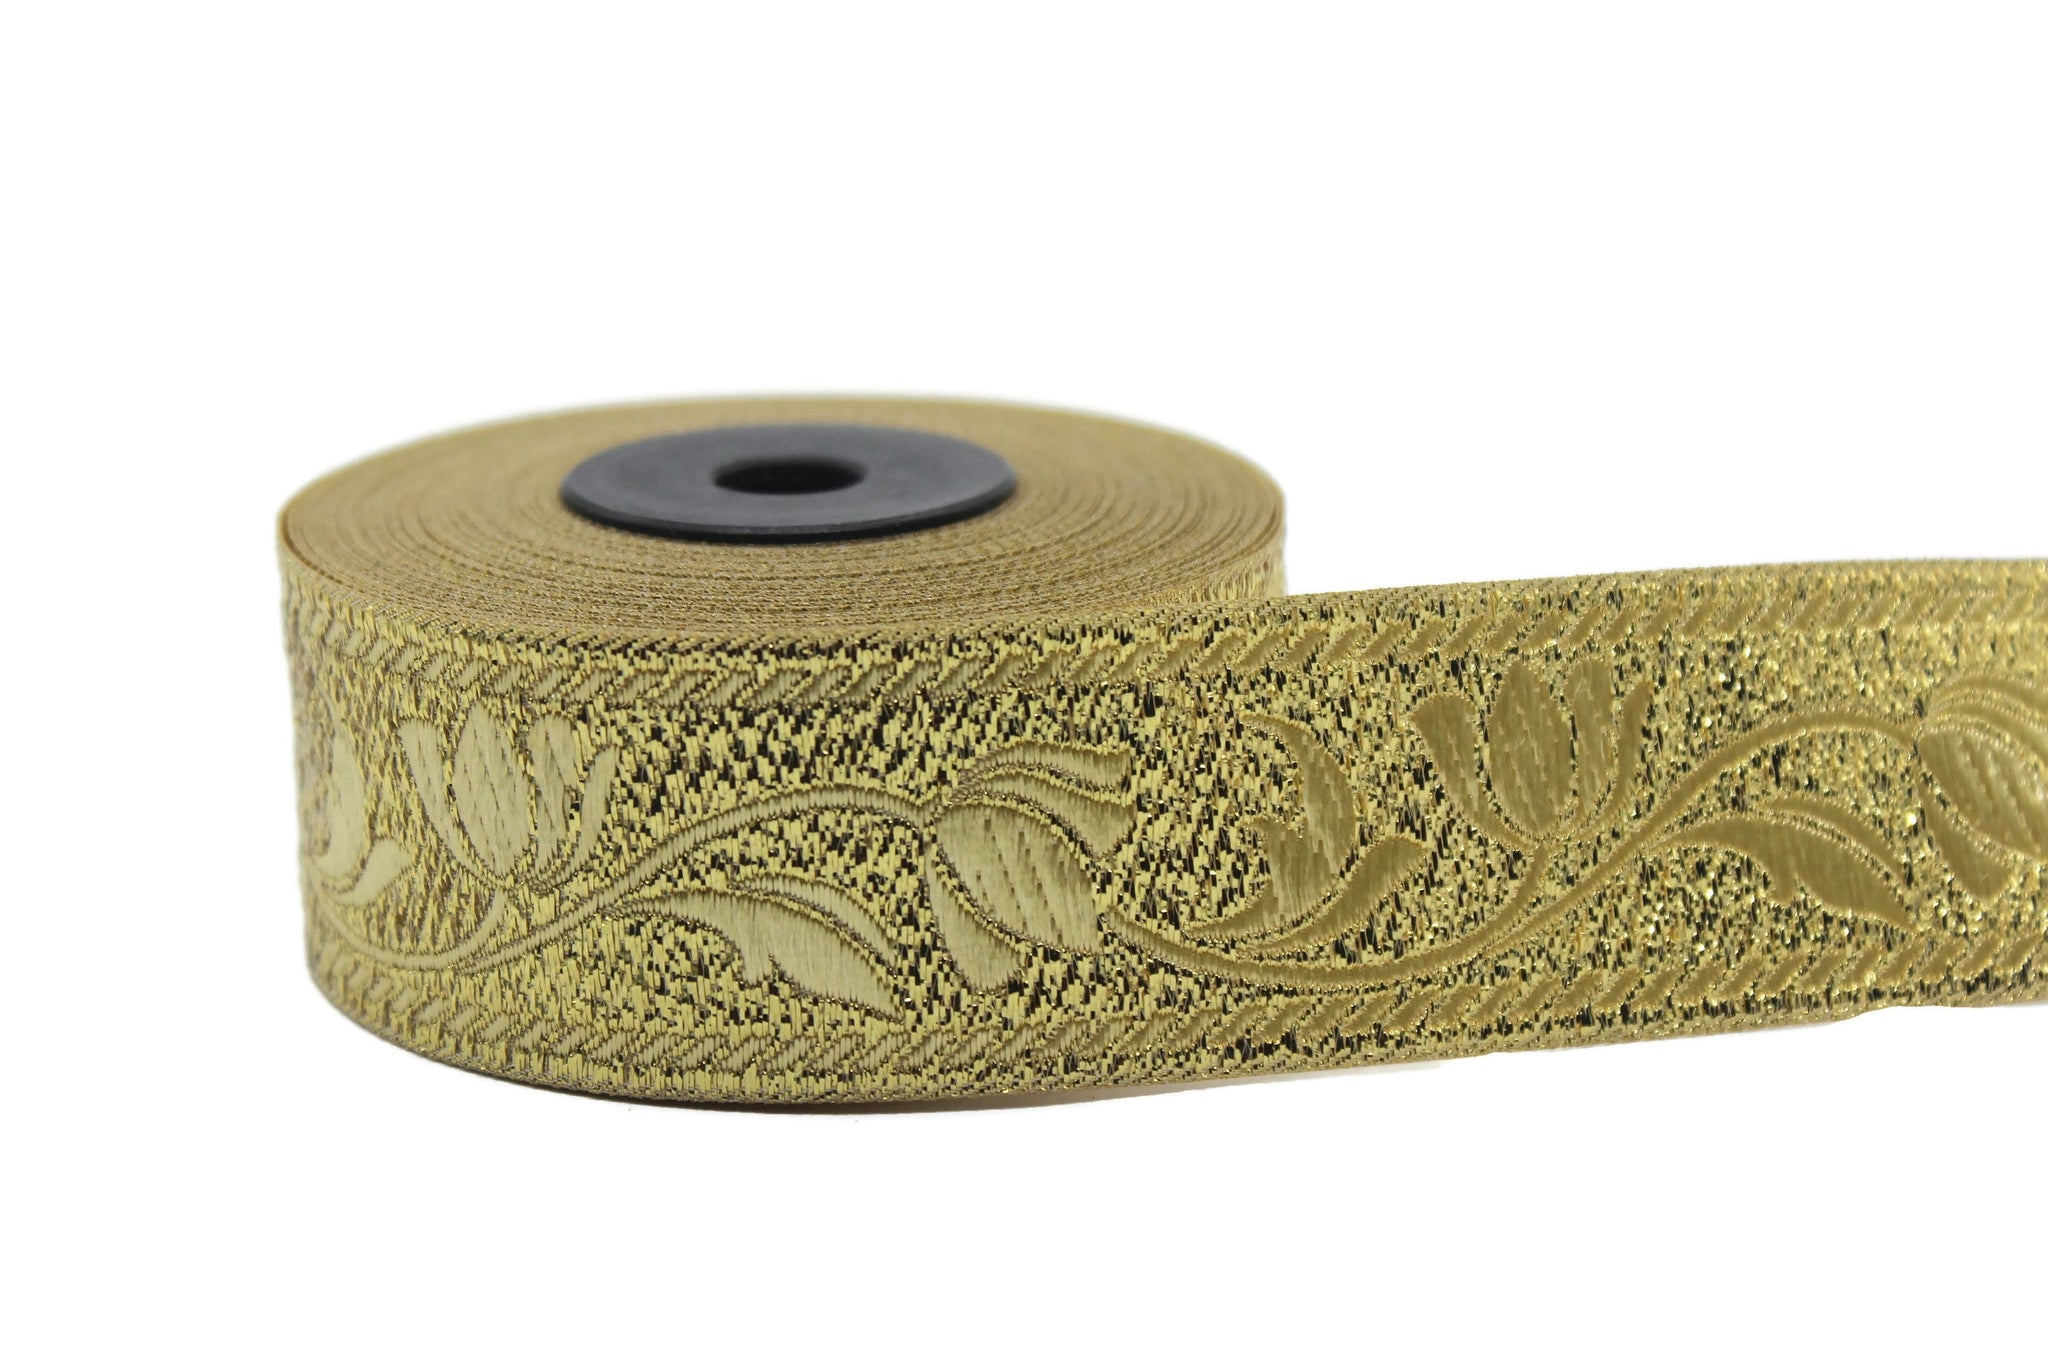 35 mm Golden ribbons, Jacquard ribbons (1.37 inches), Tulips embroidered ribbon, Jacquard trim, ribbon trim, trimming, sewing trims, 35090